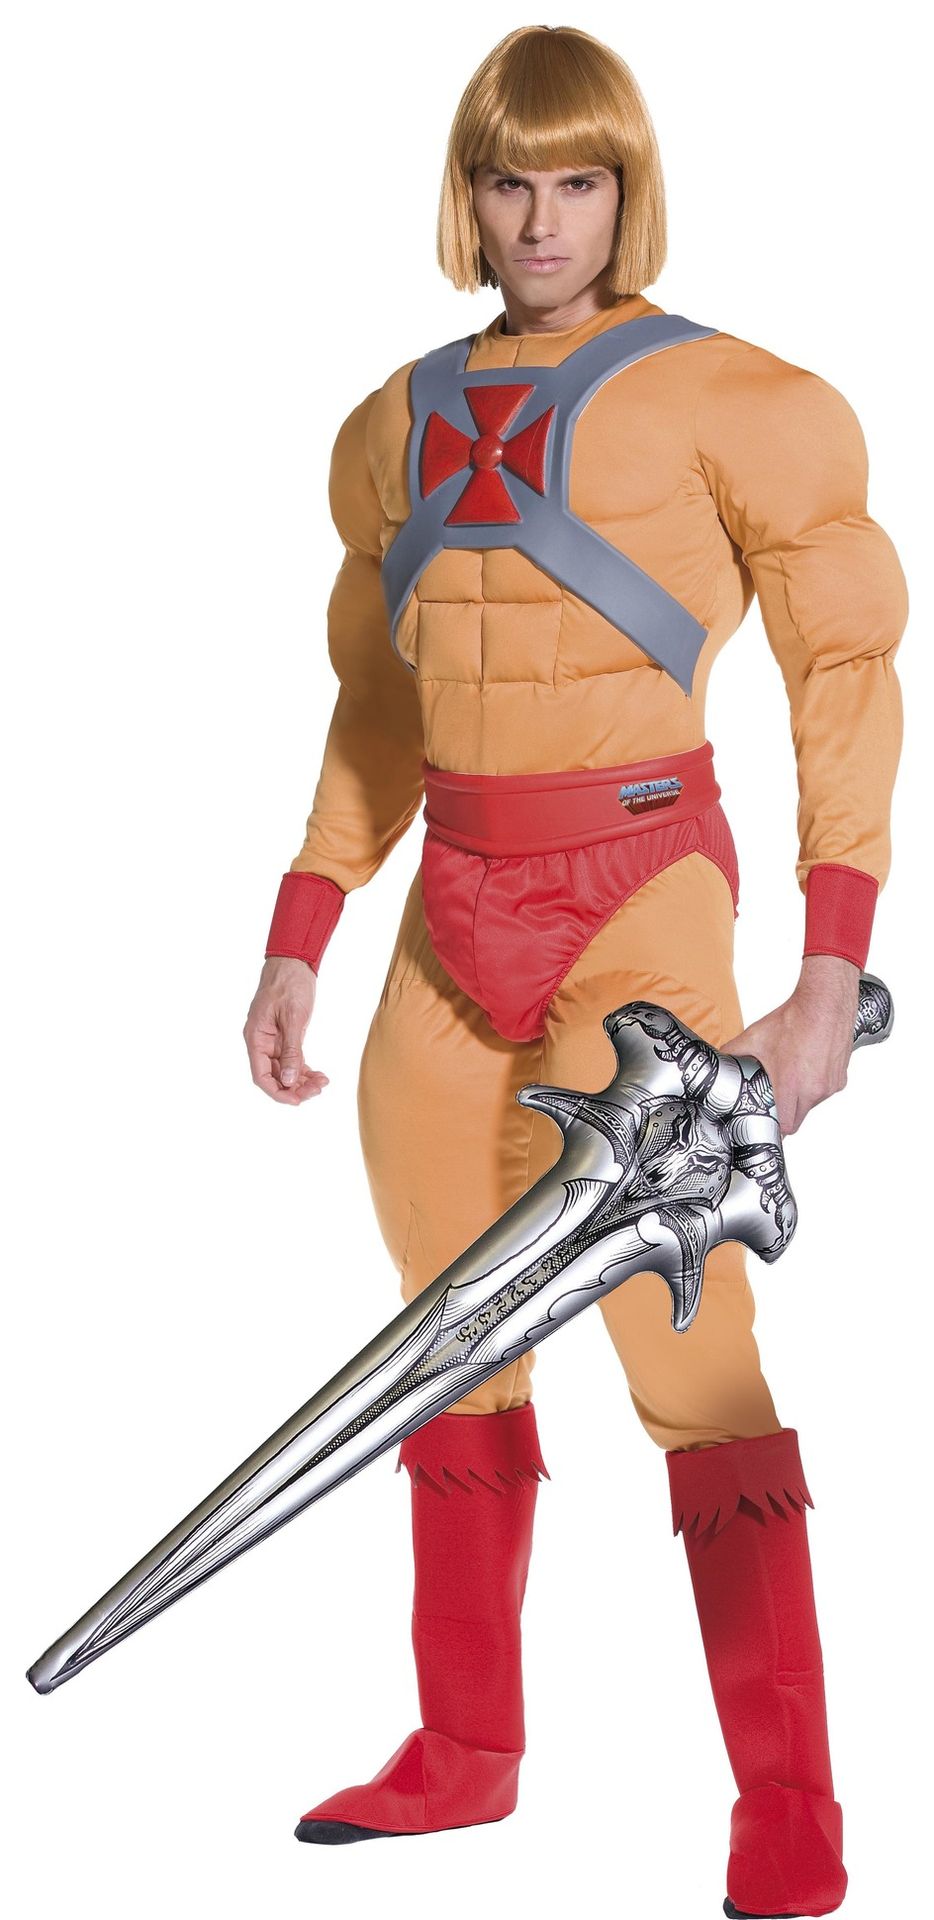 He-Man outfit